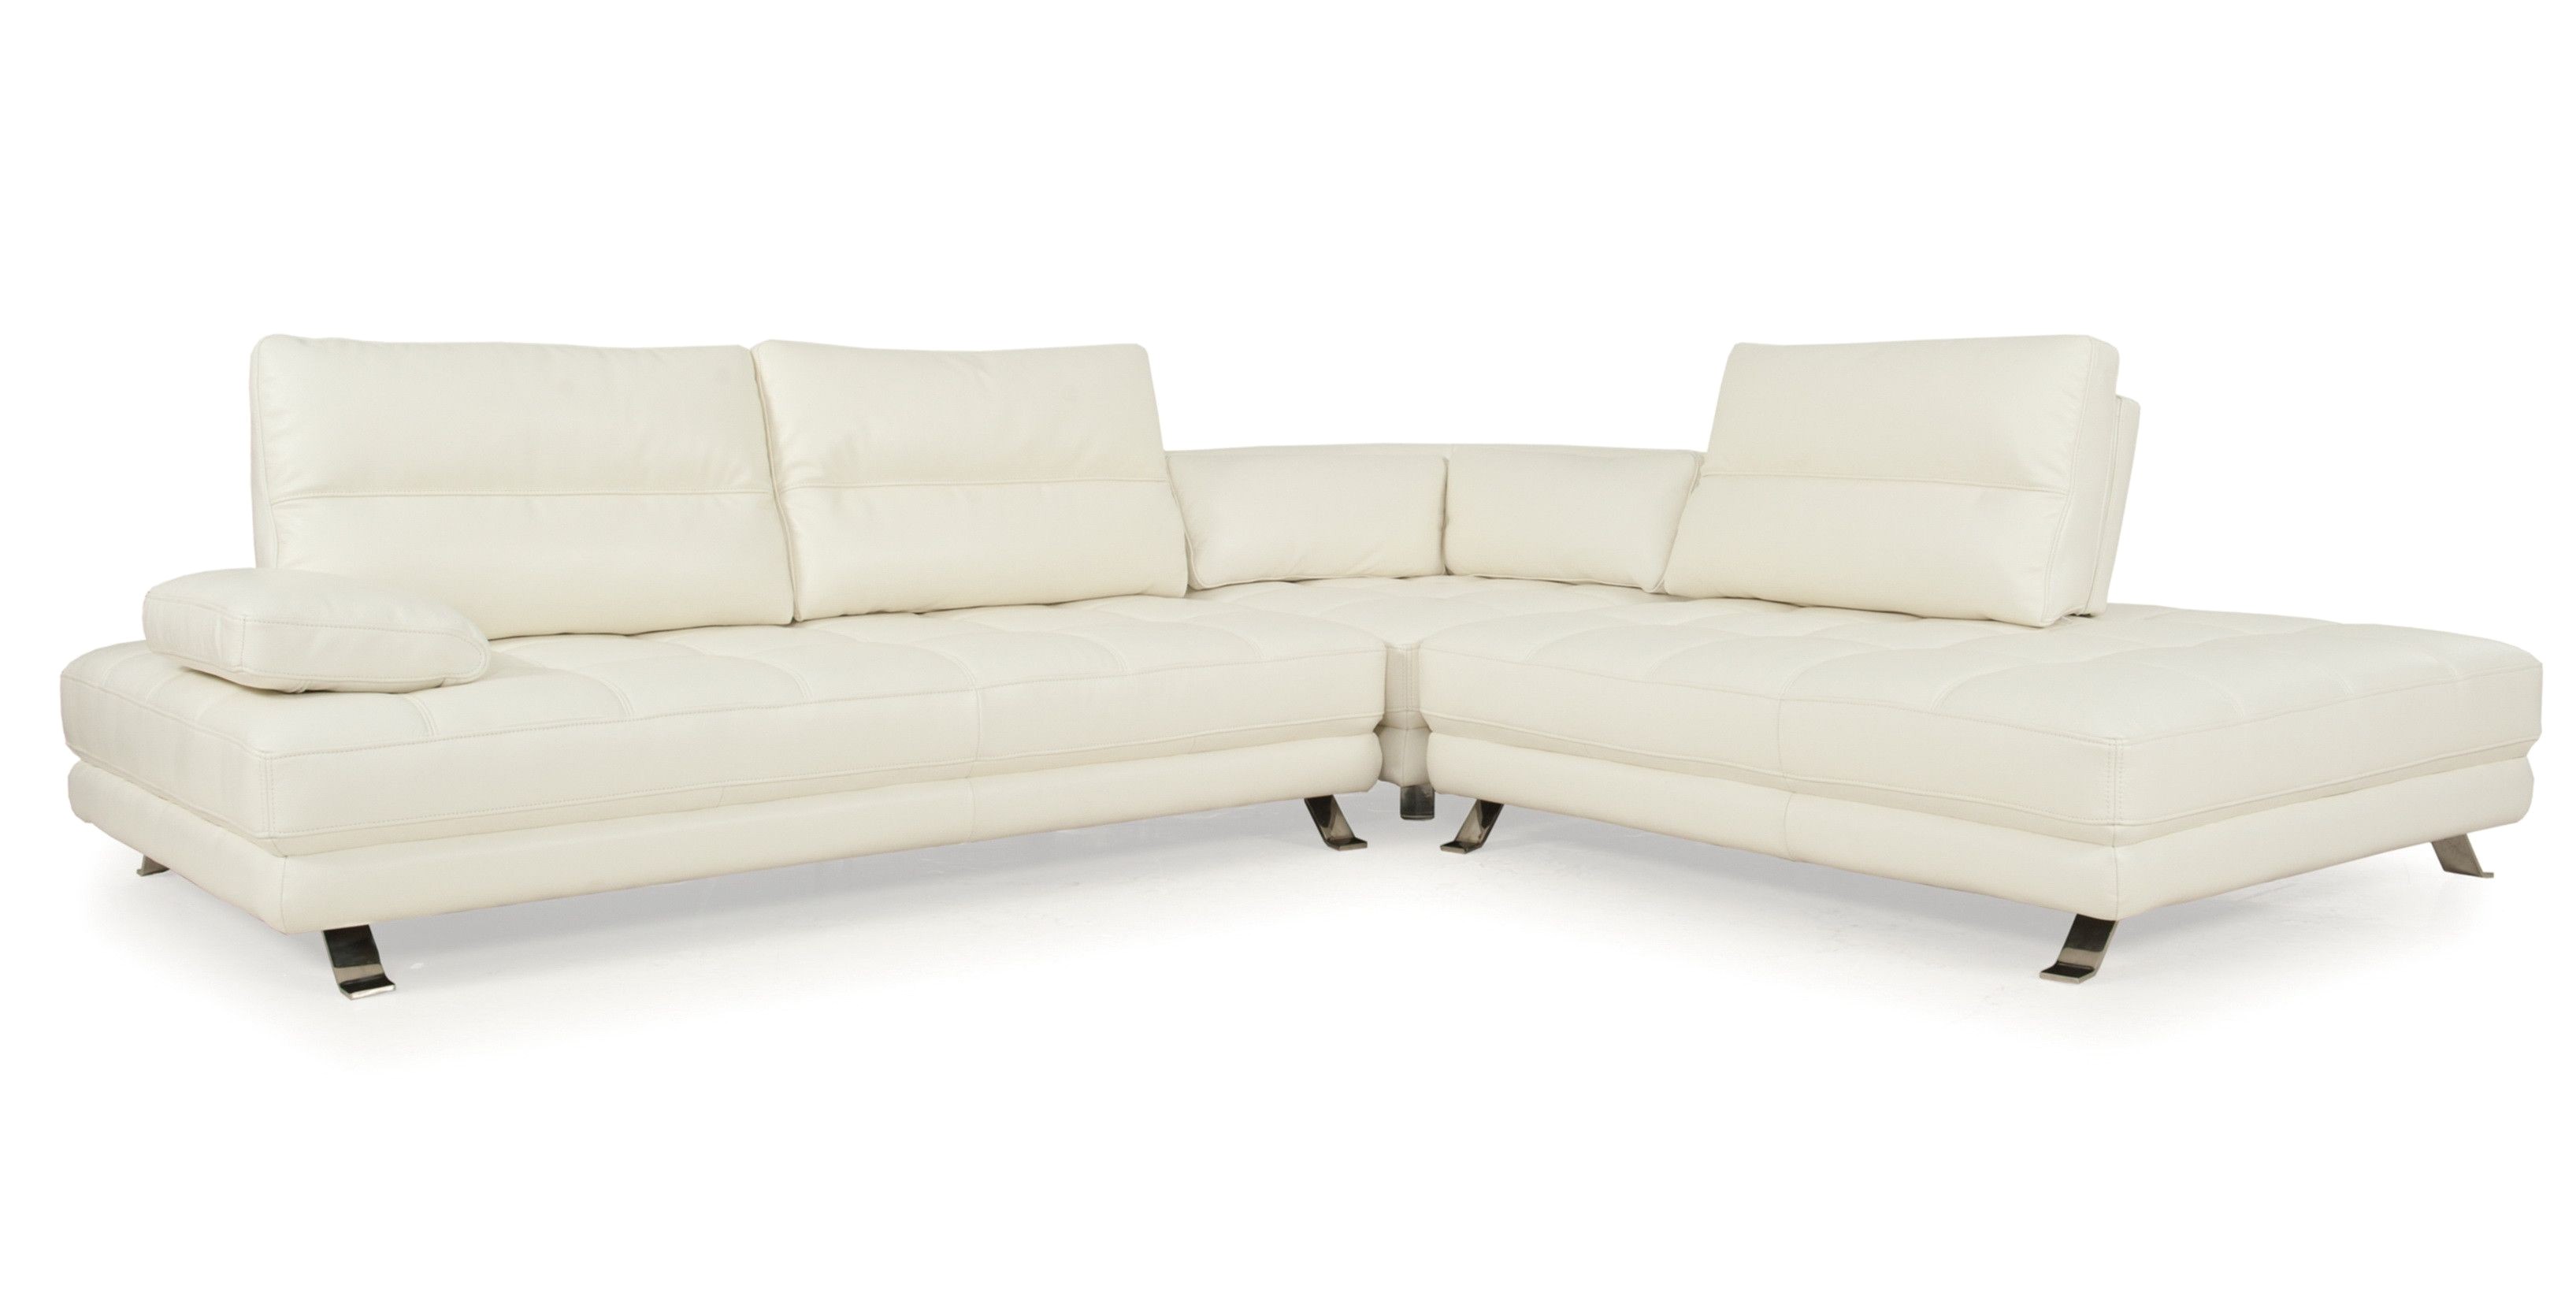 Italian Sectional sofas Leather Teva Full top Grain Leather Adjustable Contemporary Sectional